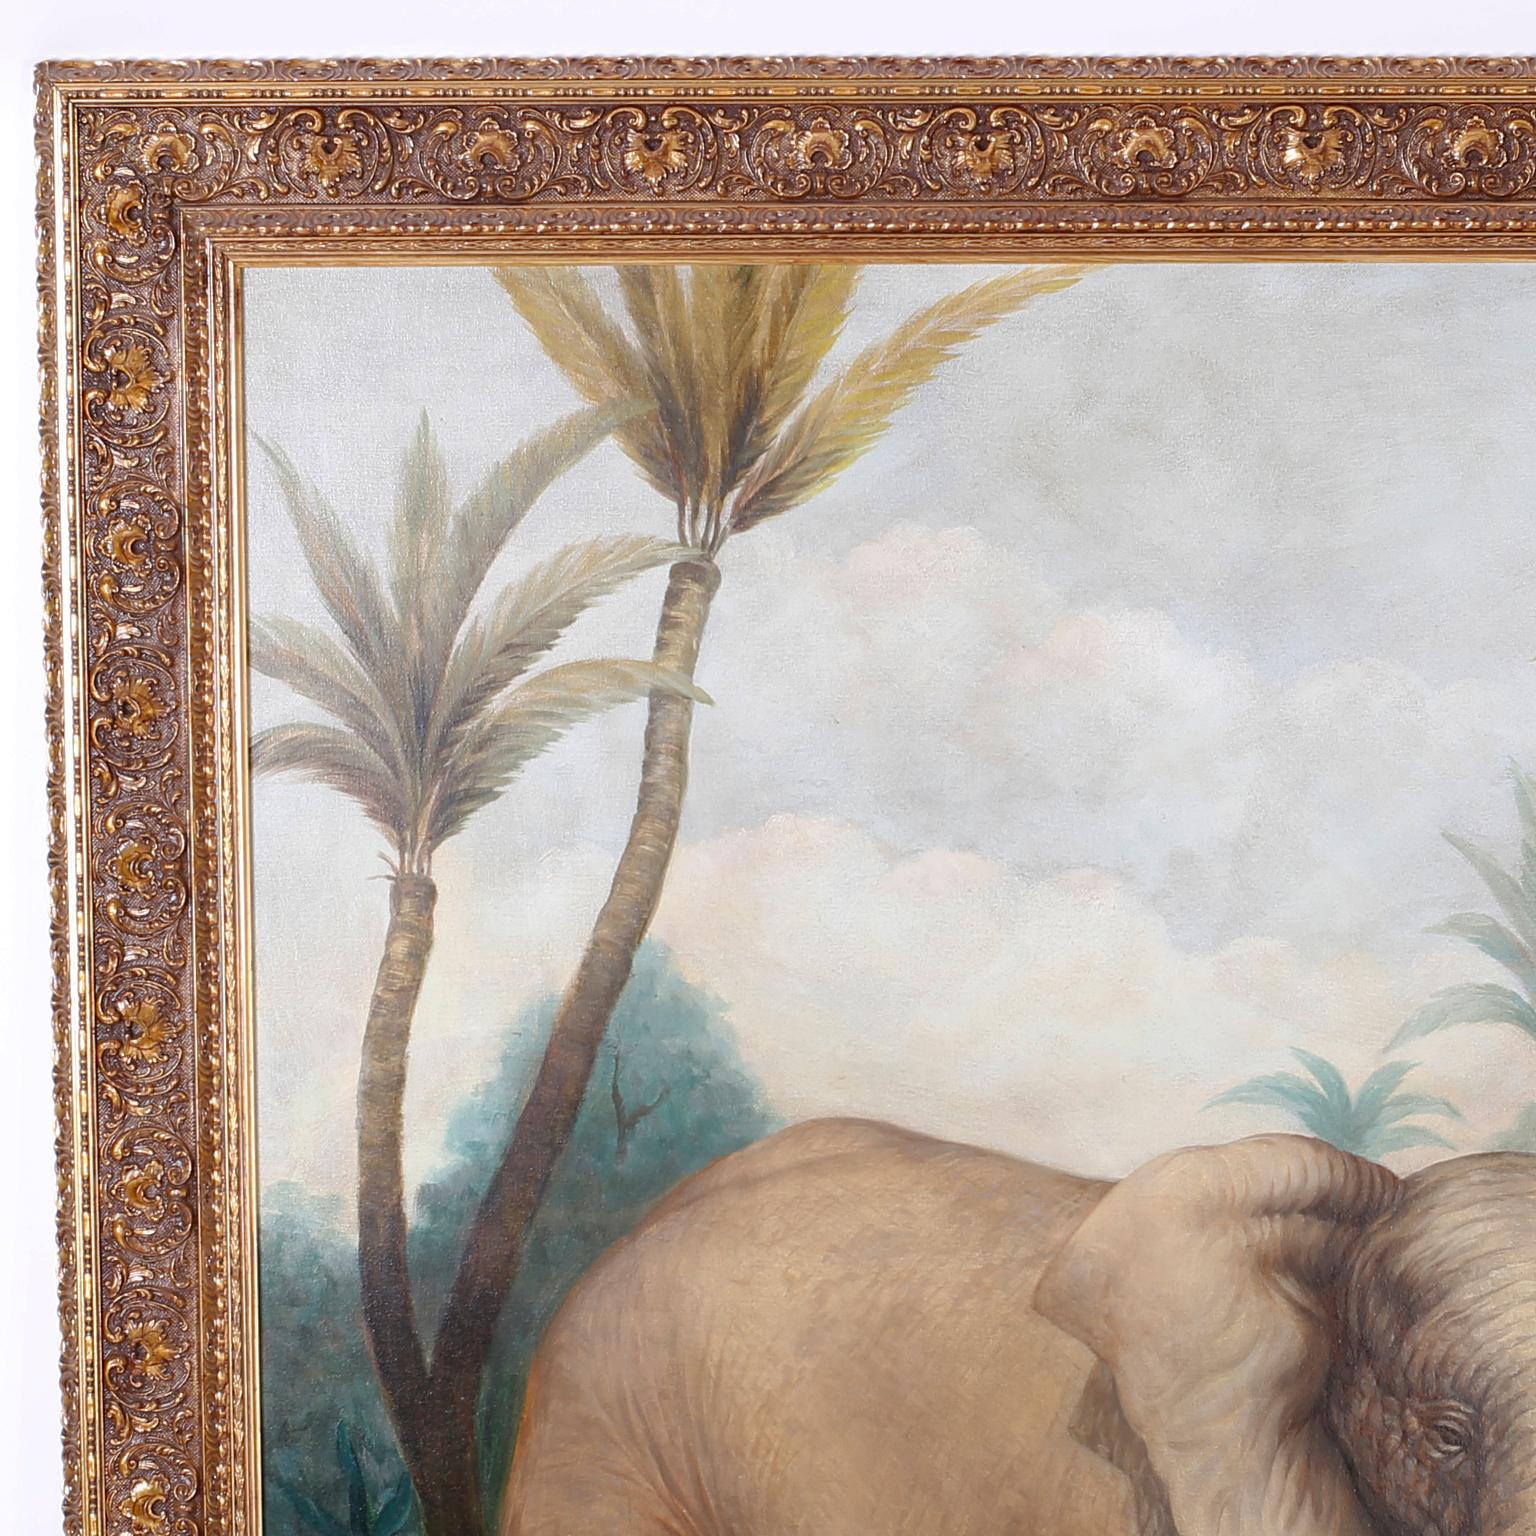 Inspiring oil painting on canvas of an elephant in a tropical setting being offered food by a man in a turban, capturing an emotionally touching moment with a soulful expression of peace and harmony. Indistinctly signed in the lower right.